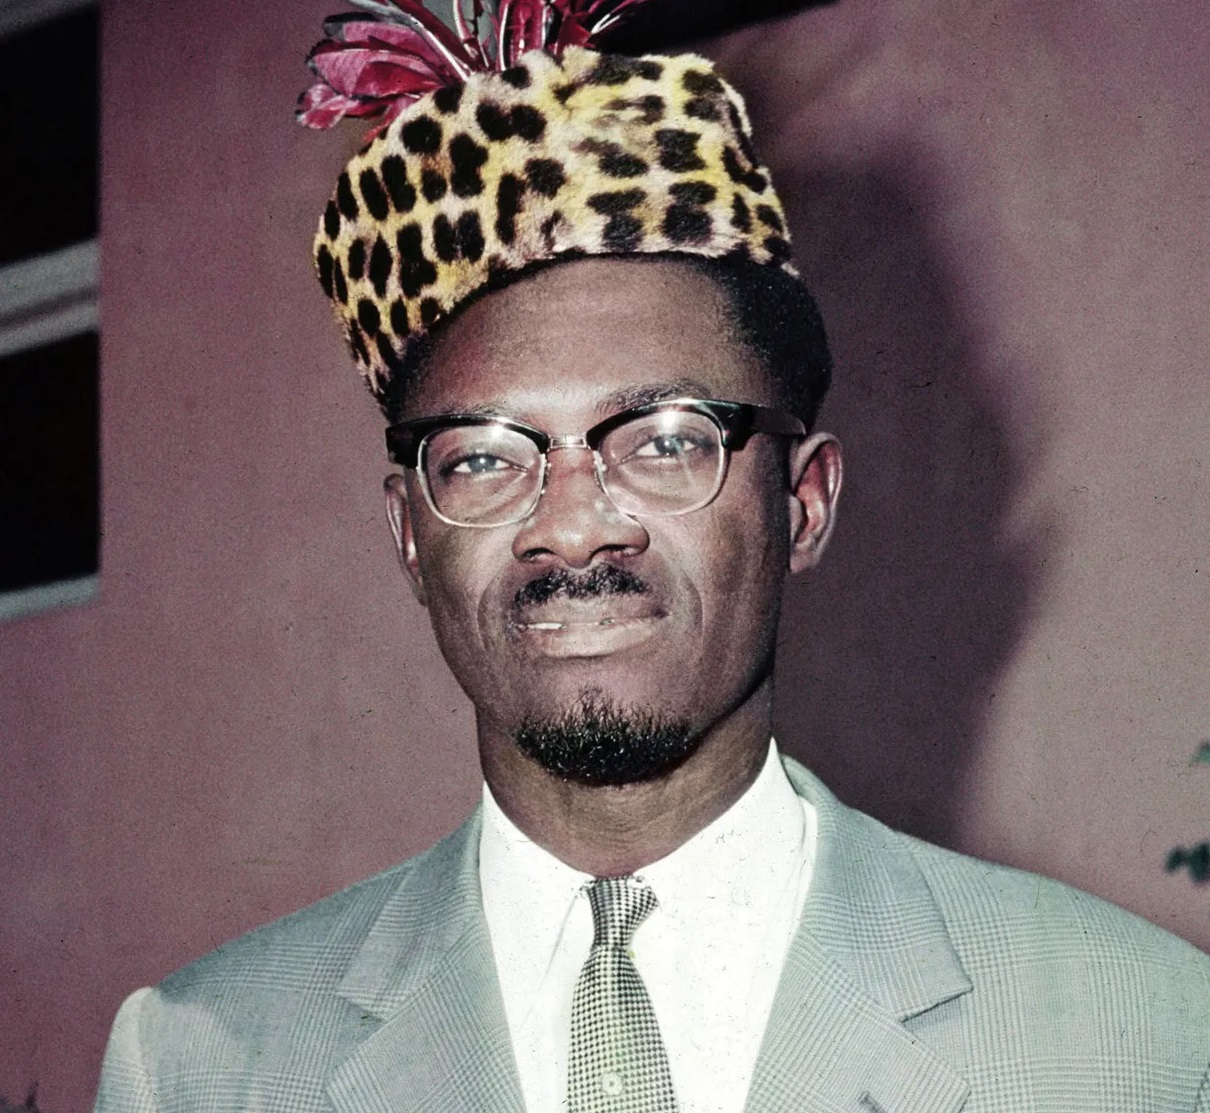 New twist to a long saga with return of slain Congolese leader Patrice Lumumba’s tooth